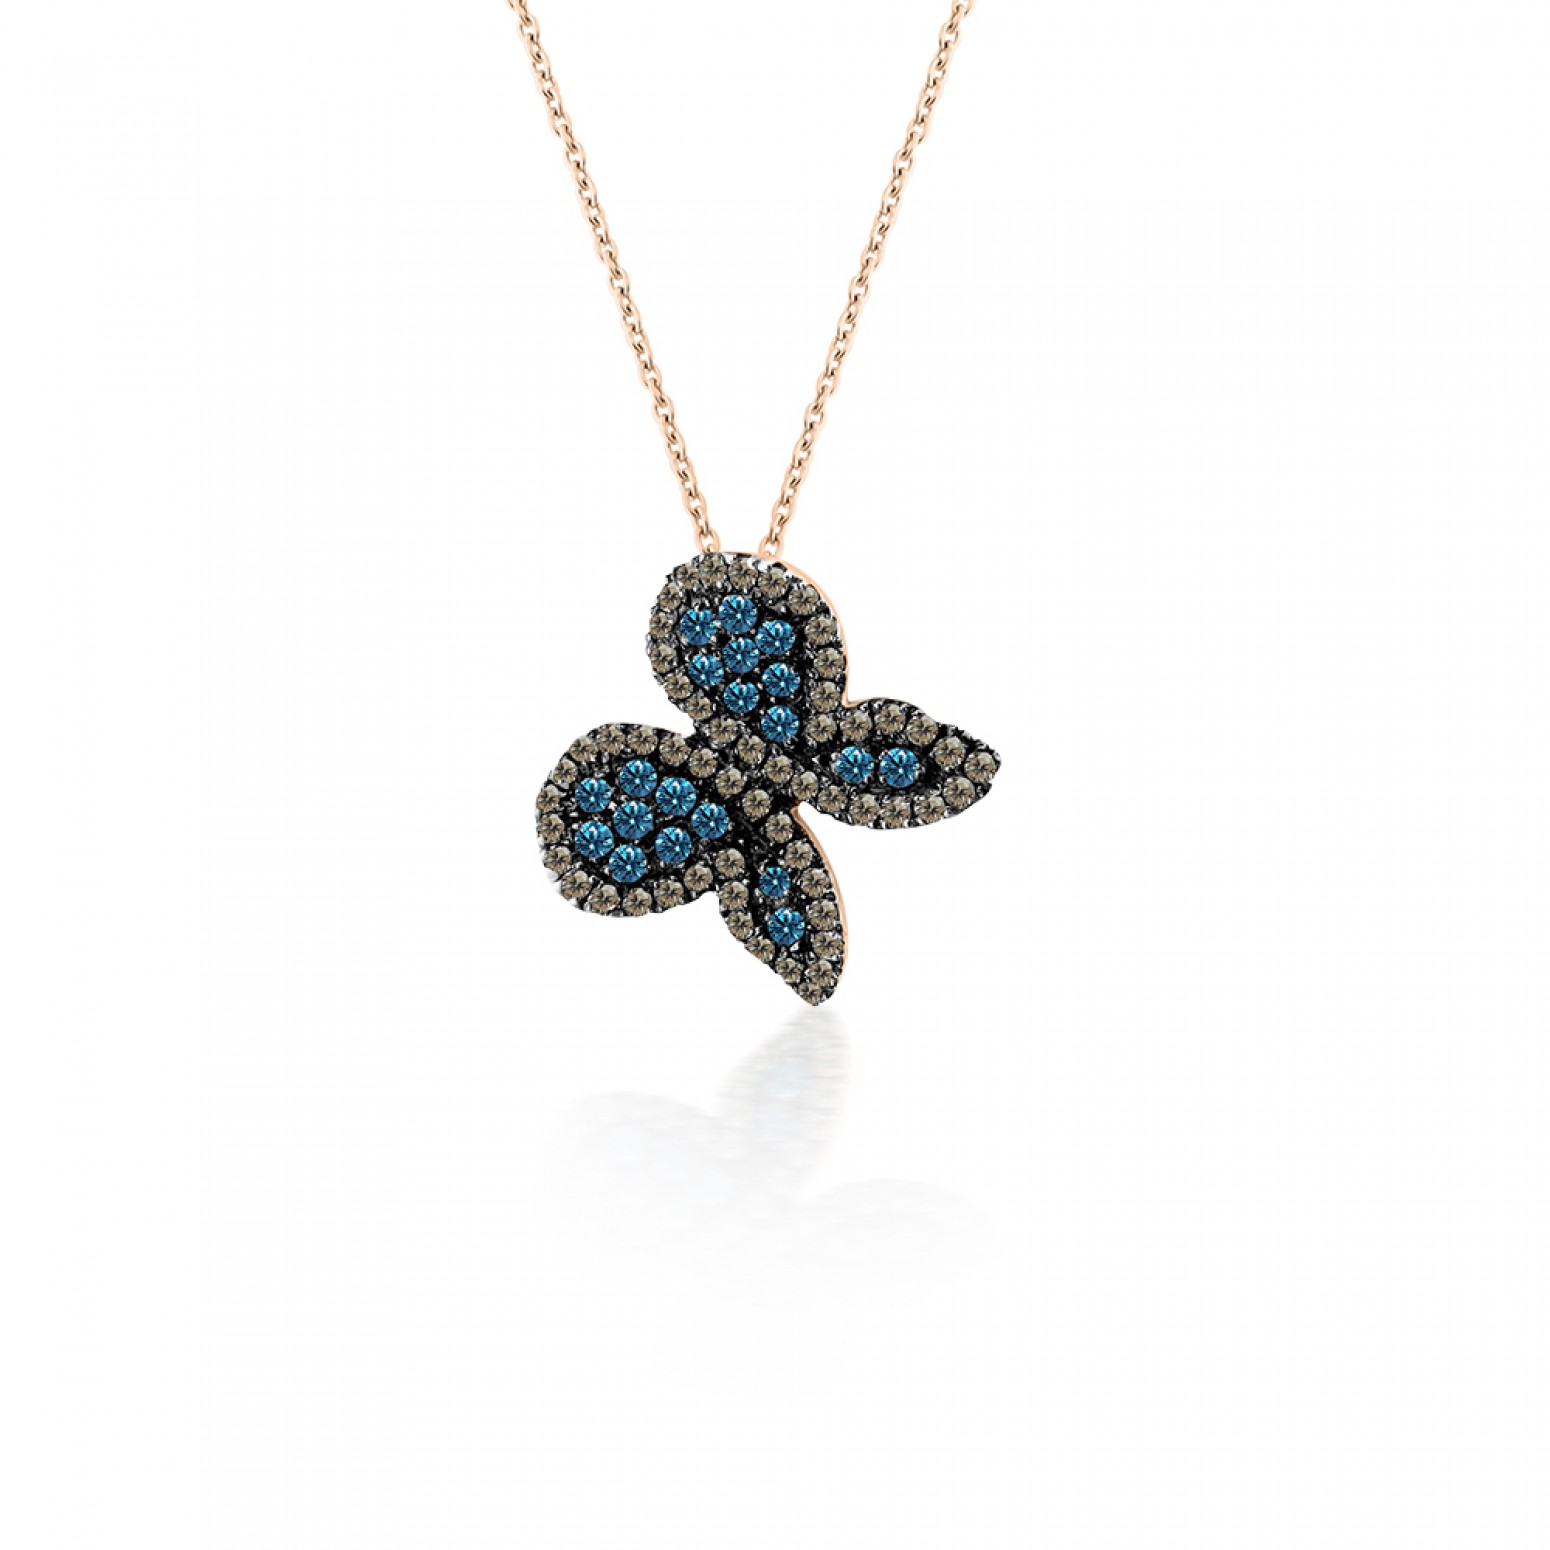 Butterfly necklace, Κ18 pink gold with blue diamonds 0.21ct and brown diamonds 0.14ct, ko5541 NECKLACES Κοσμηματα - chrilia.gr